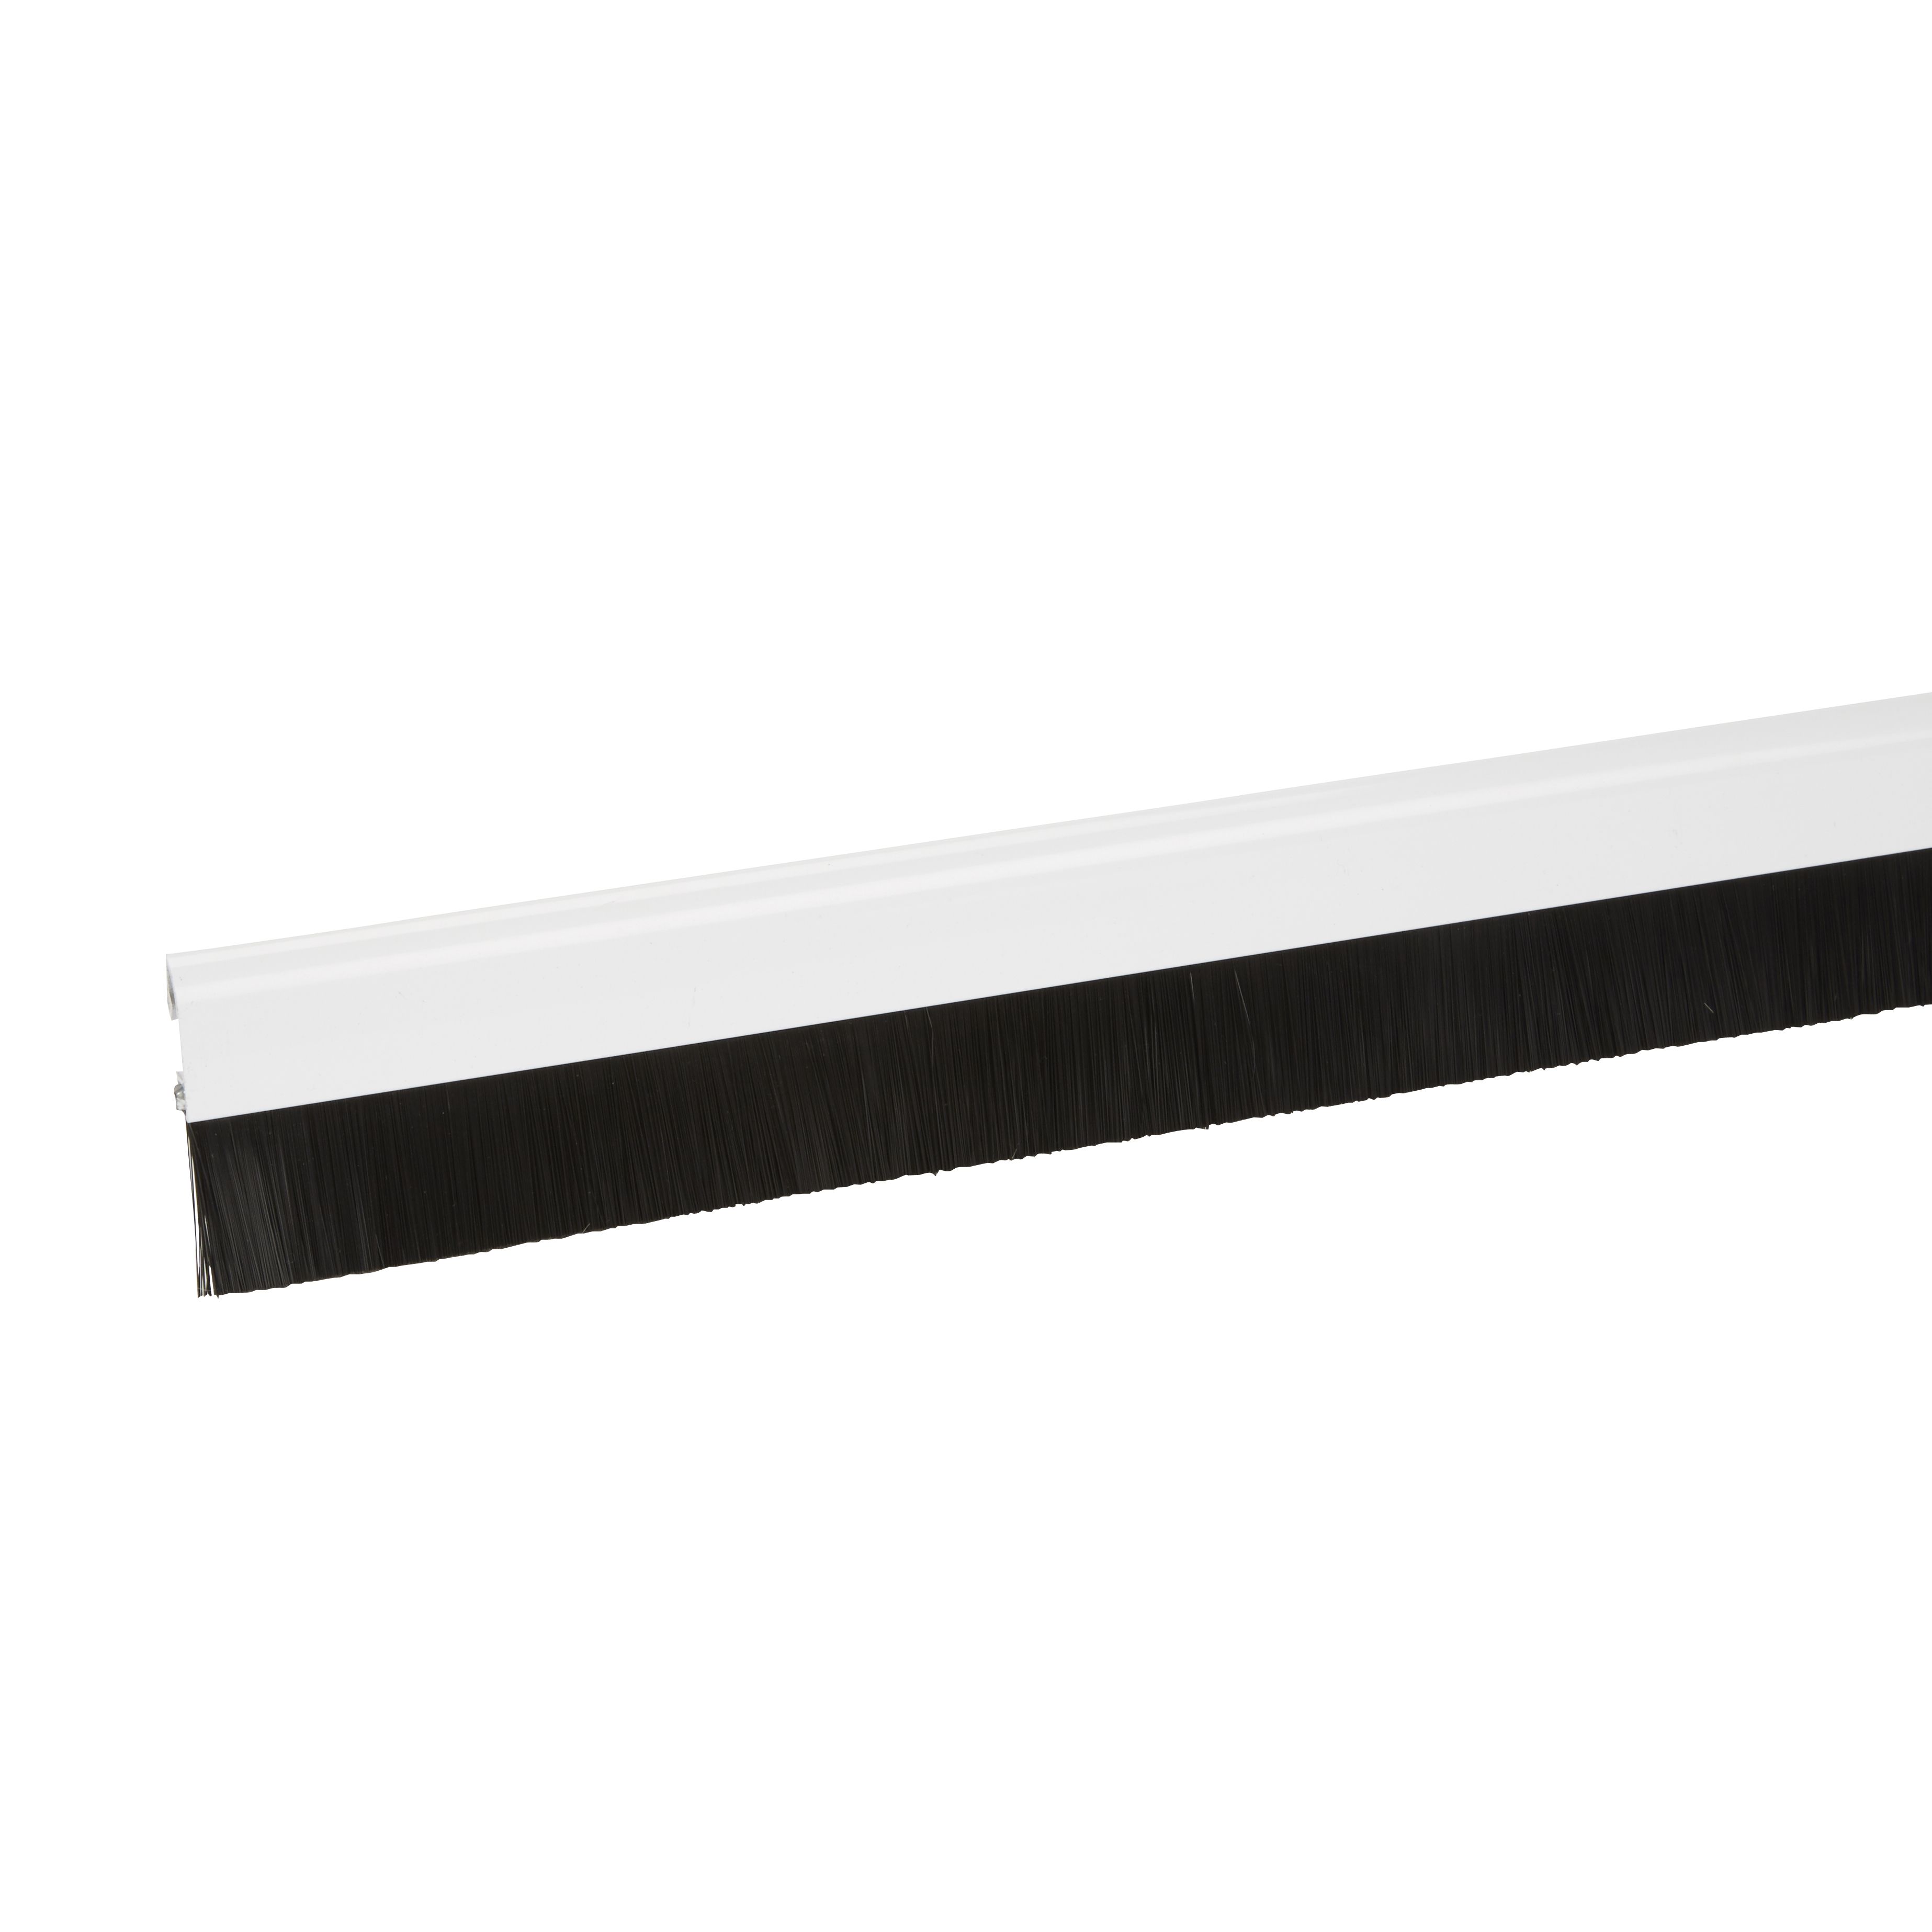 Simple Garage Door Draught Excluder White for Small Space